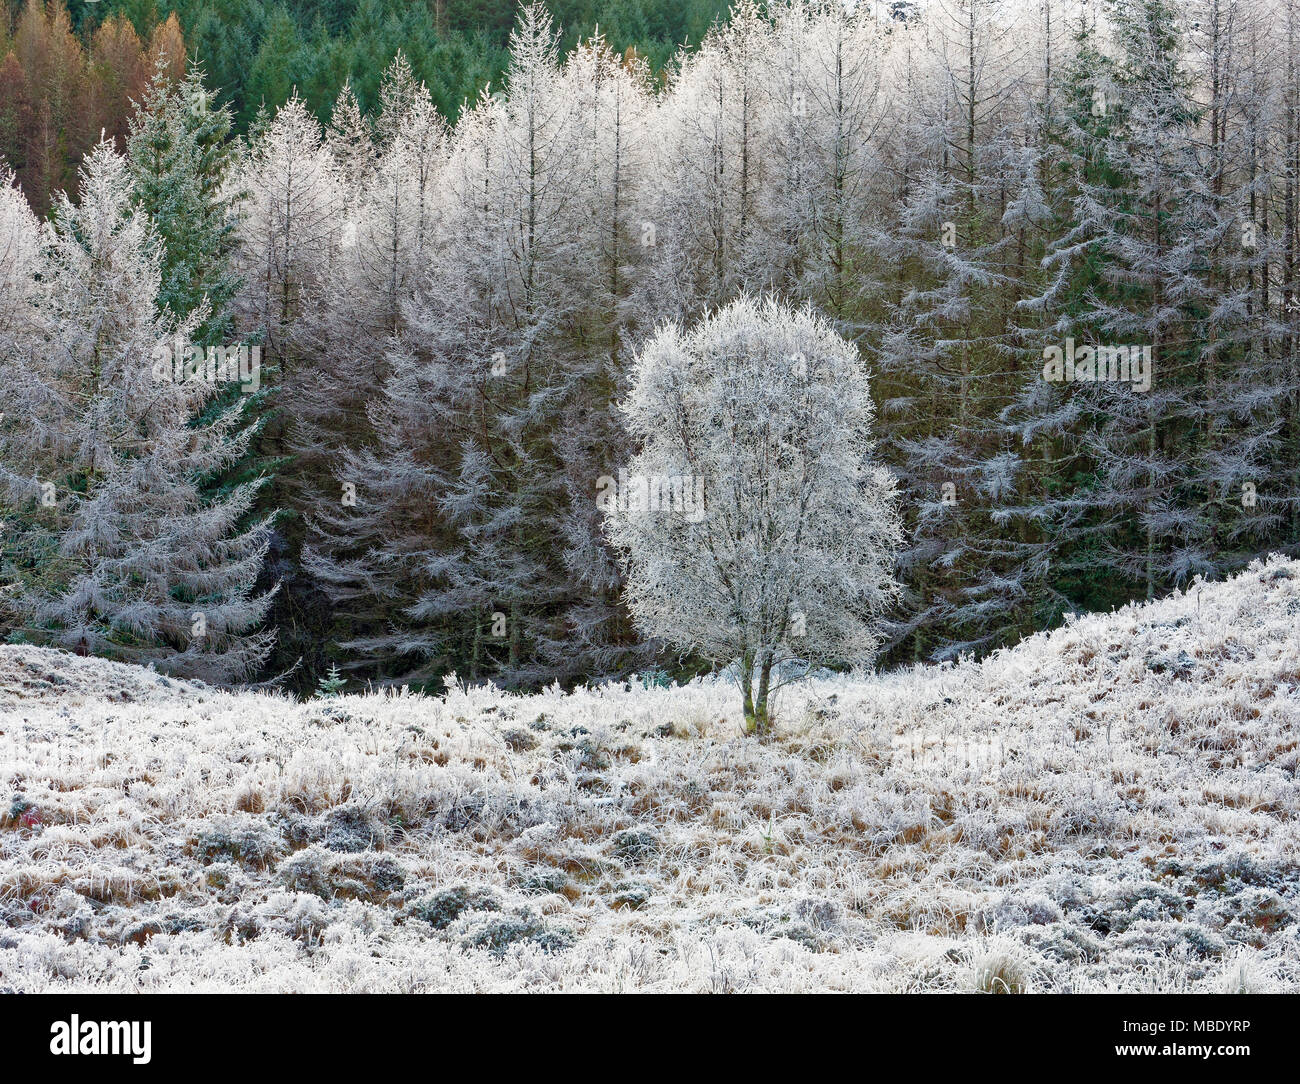 A frosty view of the remote Glen Hurich Forest in the Ardnamurchan Peninsula, Scotland. Stock Photo